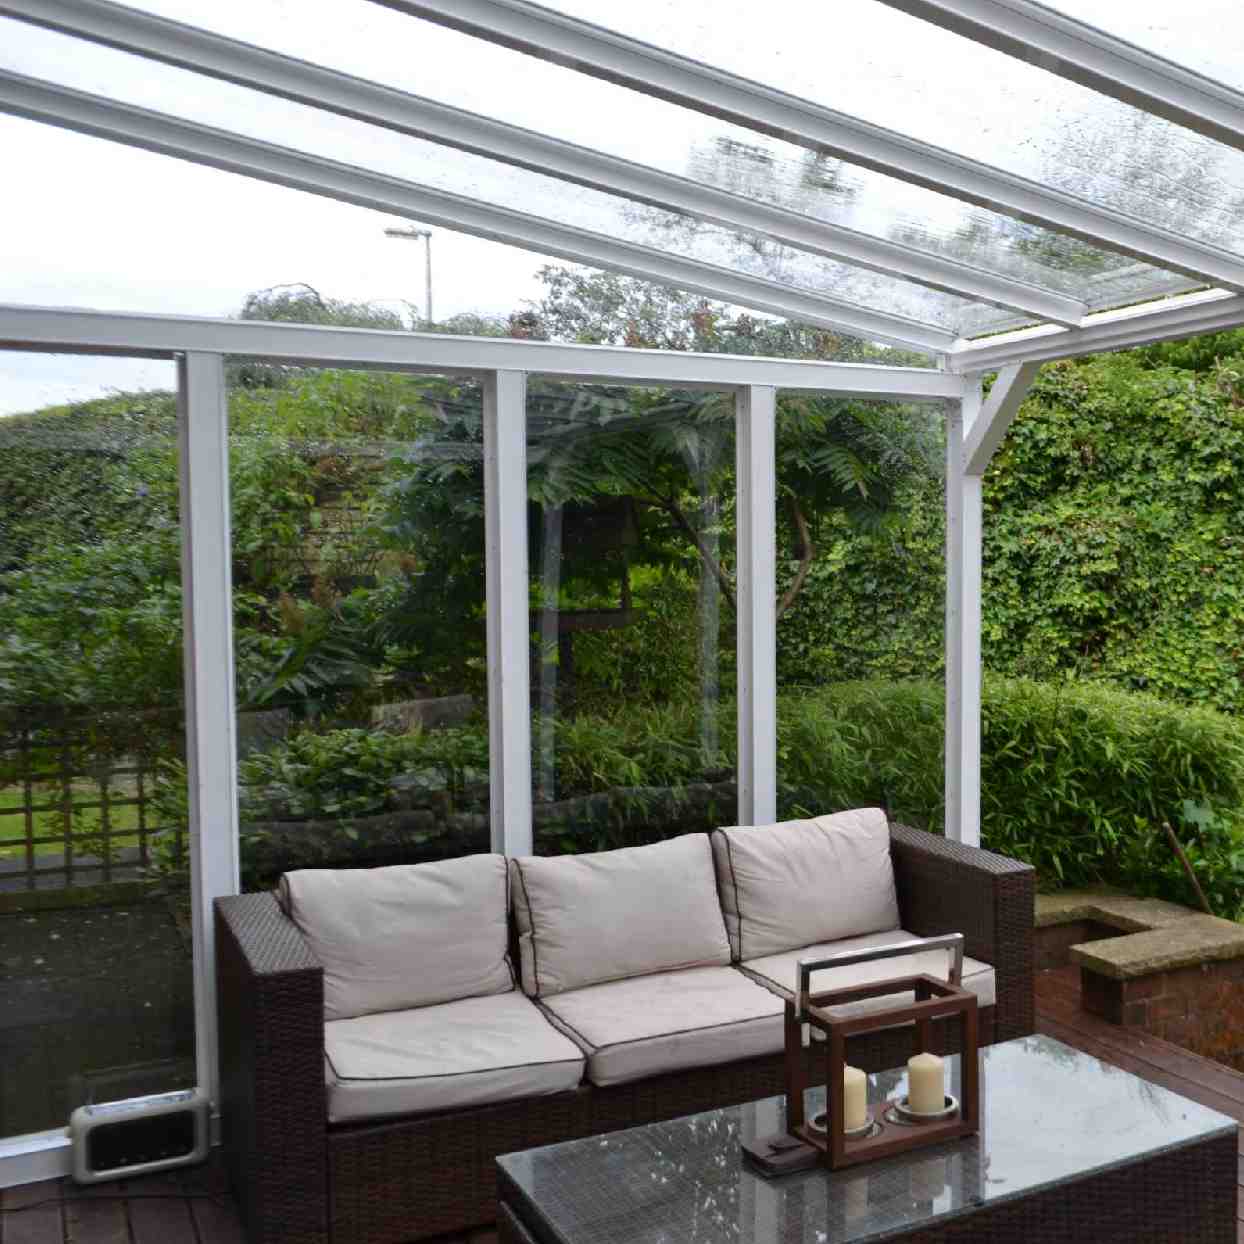 Buy Omega Verandah White with 16mm Polycarbonate Glazing - 4.2m (W) x 4.0m (P), (3) Supporting Posts online today